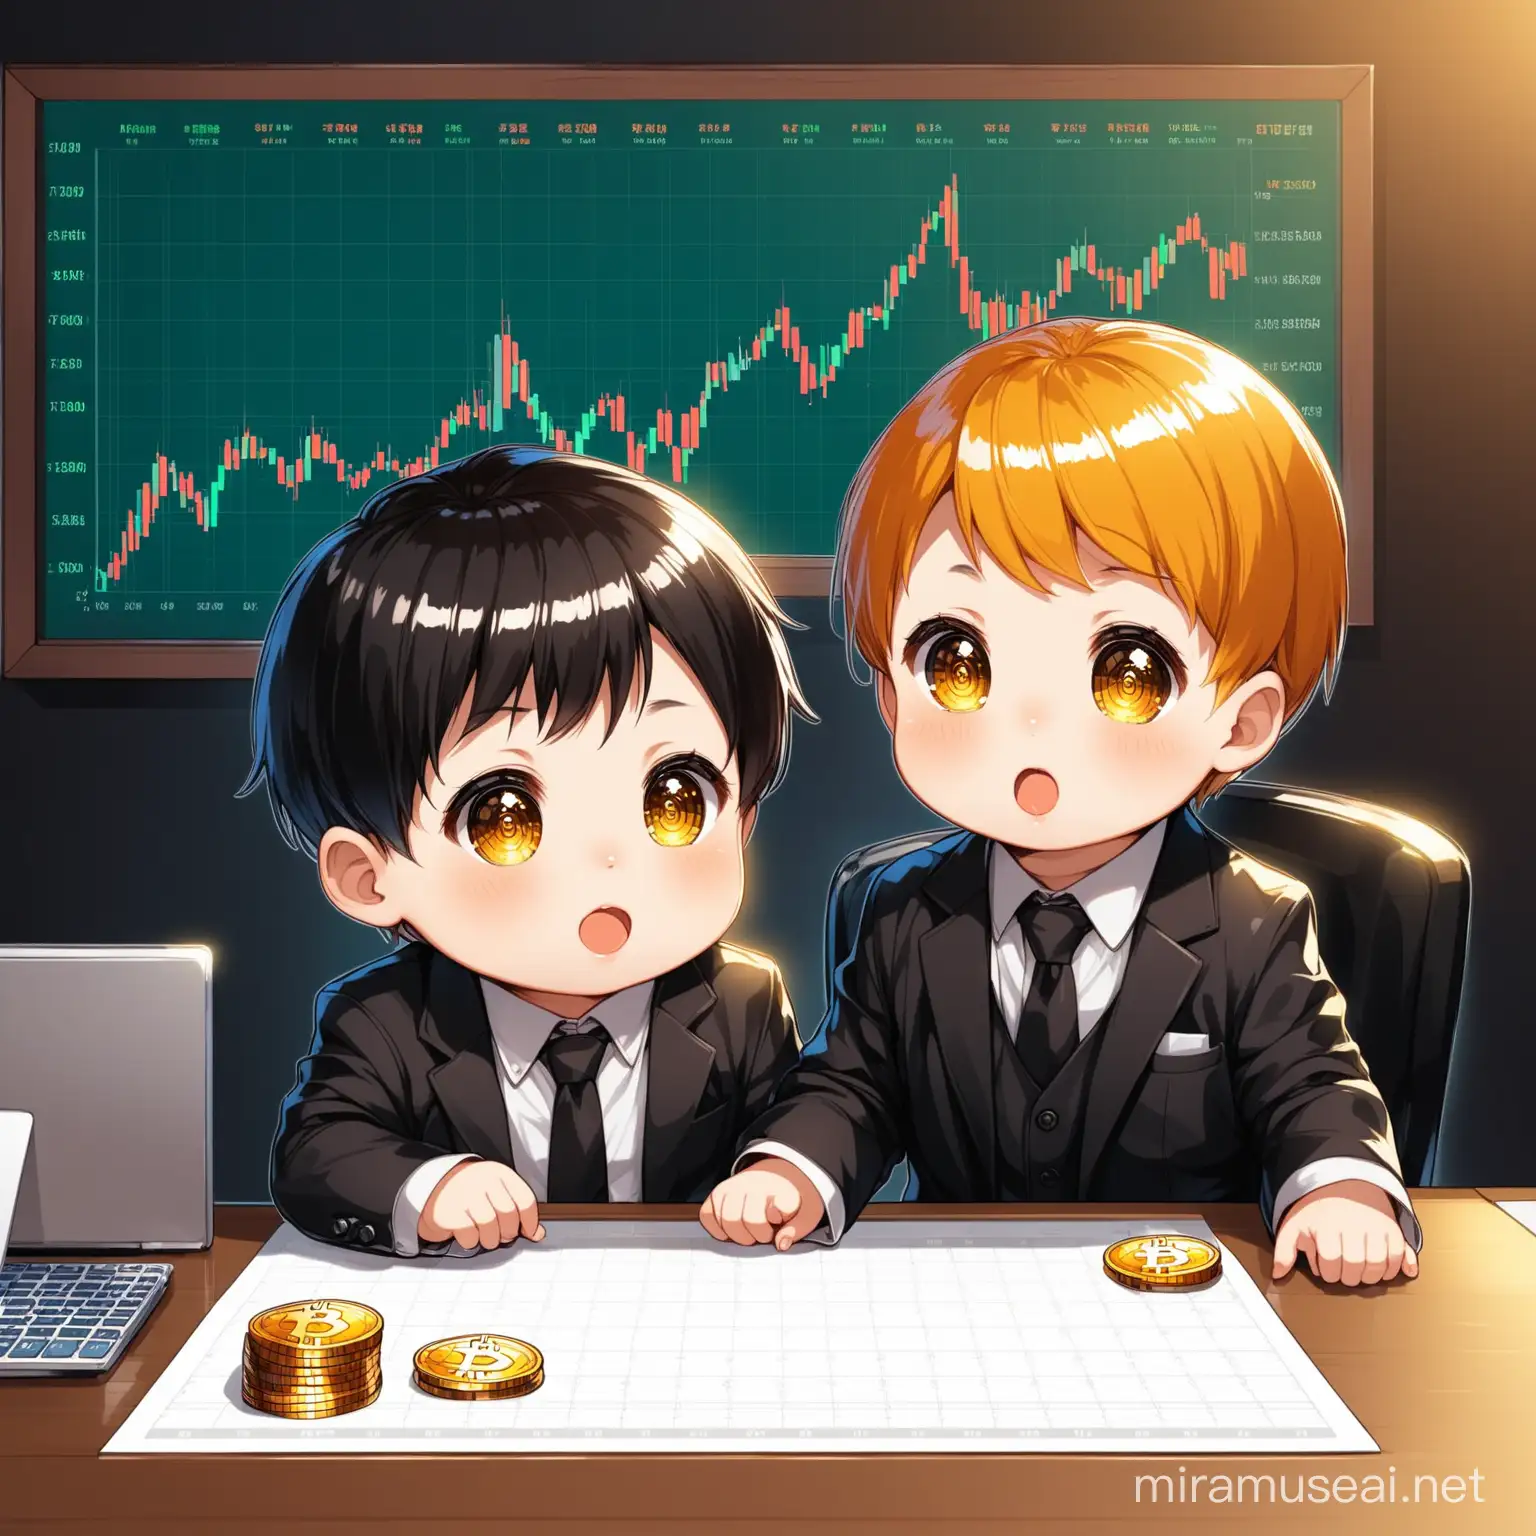 two asian cute toddler crypto boy sitting behind business desk with bitcoin ethereum on the desk and have full size chart background behind them